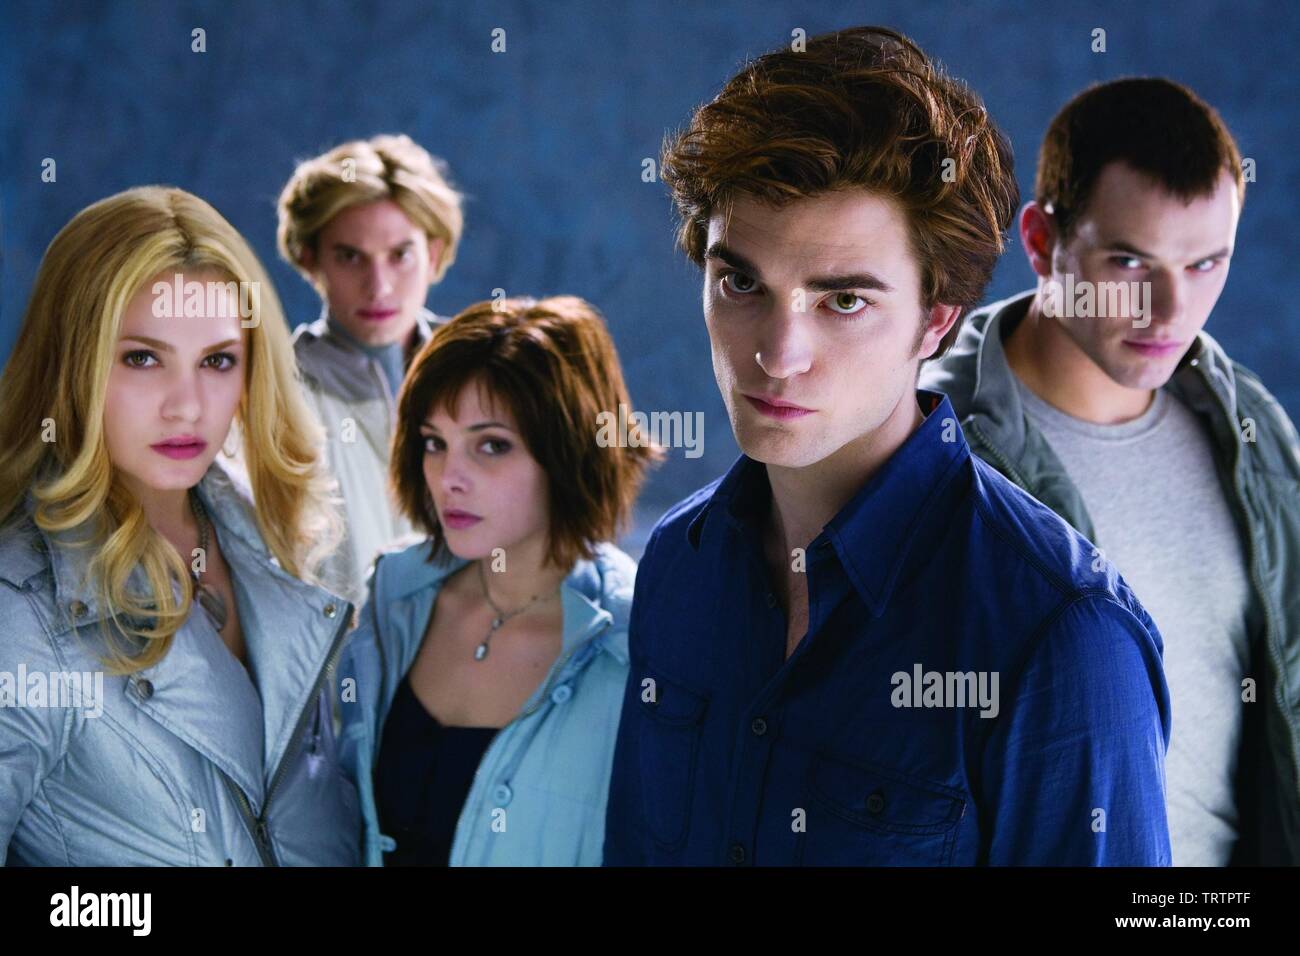 NIKKI REED , ROBERT PATTINSON , KELLAN LUTZ , ASHLEY GREENE and JACKSON RATHBONE in TWILIGHT (2008). Copyright: Editorial use only. No merchandising or book covers. This is a publicly distributed handout. Access rights only, no license of copyright provided. Only to be reproduced in conjunction with promotion of this film. Credit: IMPRINT ENTERTAINMENT/MAVERICK FILMS/SUMMIT ENTERTAINMENT/ / Album Stock Photo